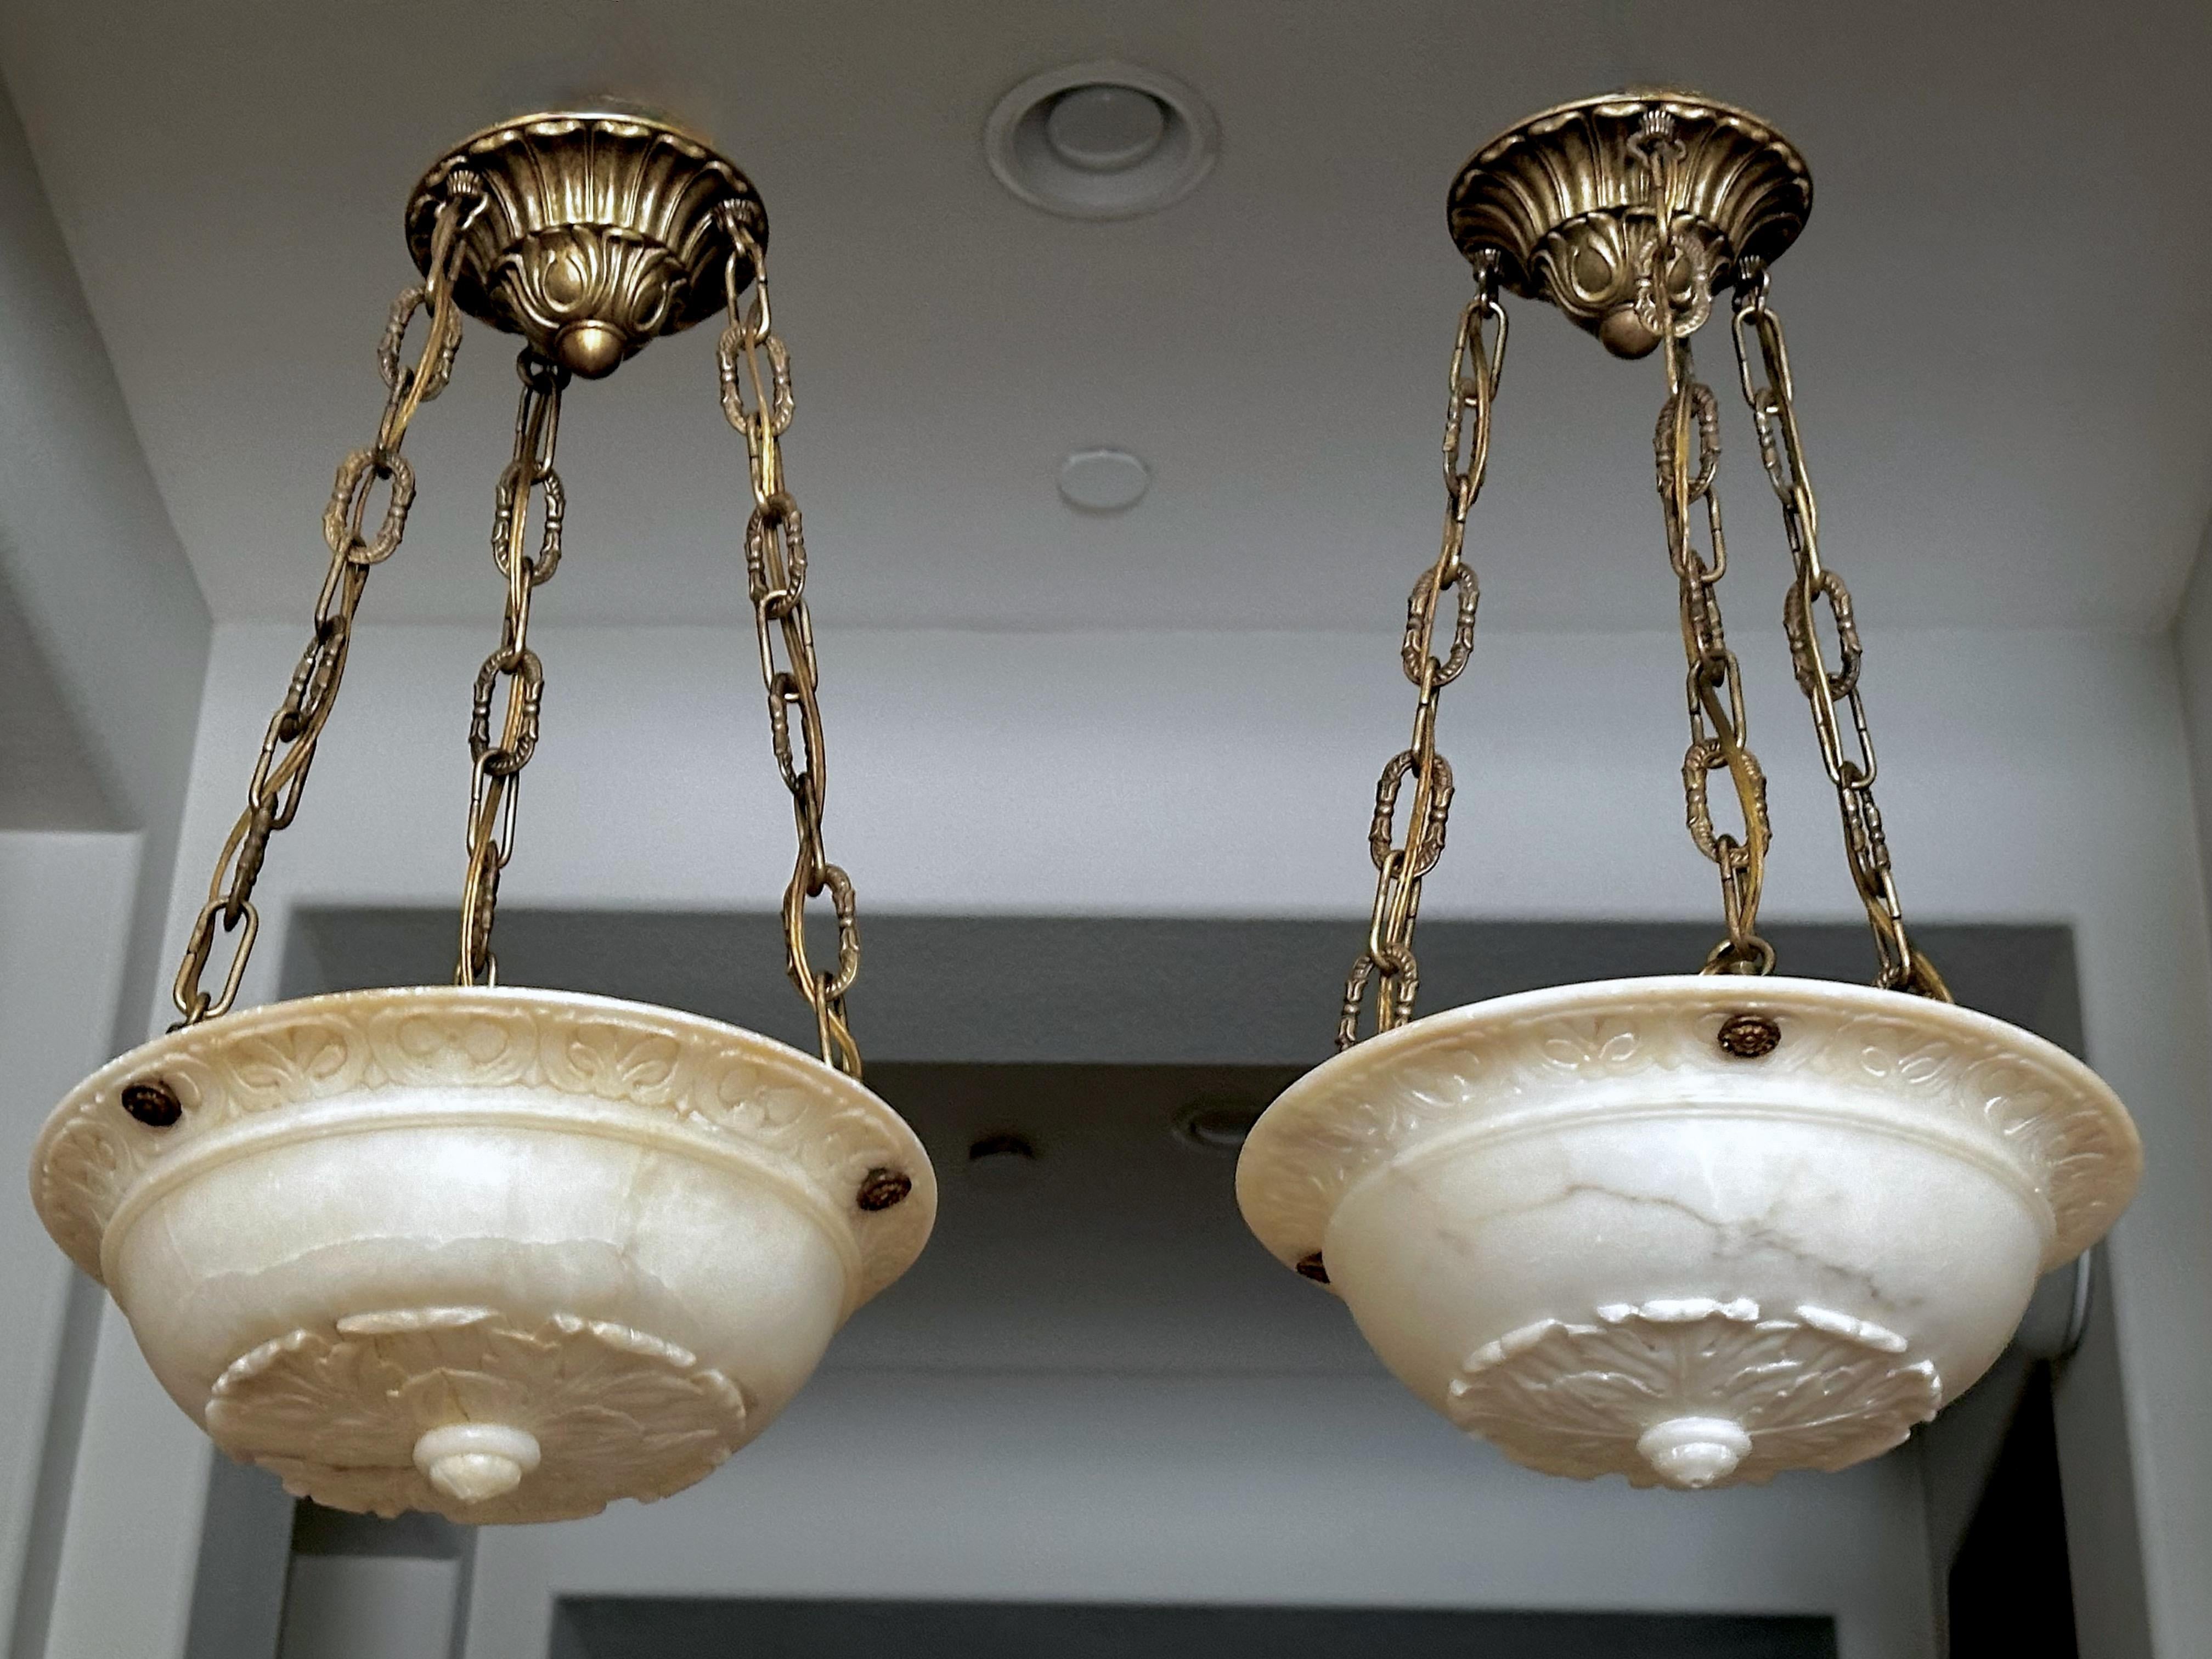 Pair of smaller scale finely carved Neoclassic style alabaster chandelier pendant ceiling lights, with all new aged patinated brass fittings, chain and ceiling canopy. The intricately carved alabaster bowls are attributed to EF Caldwell. Each newly